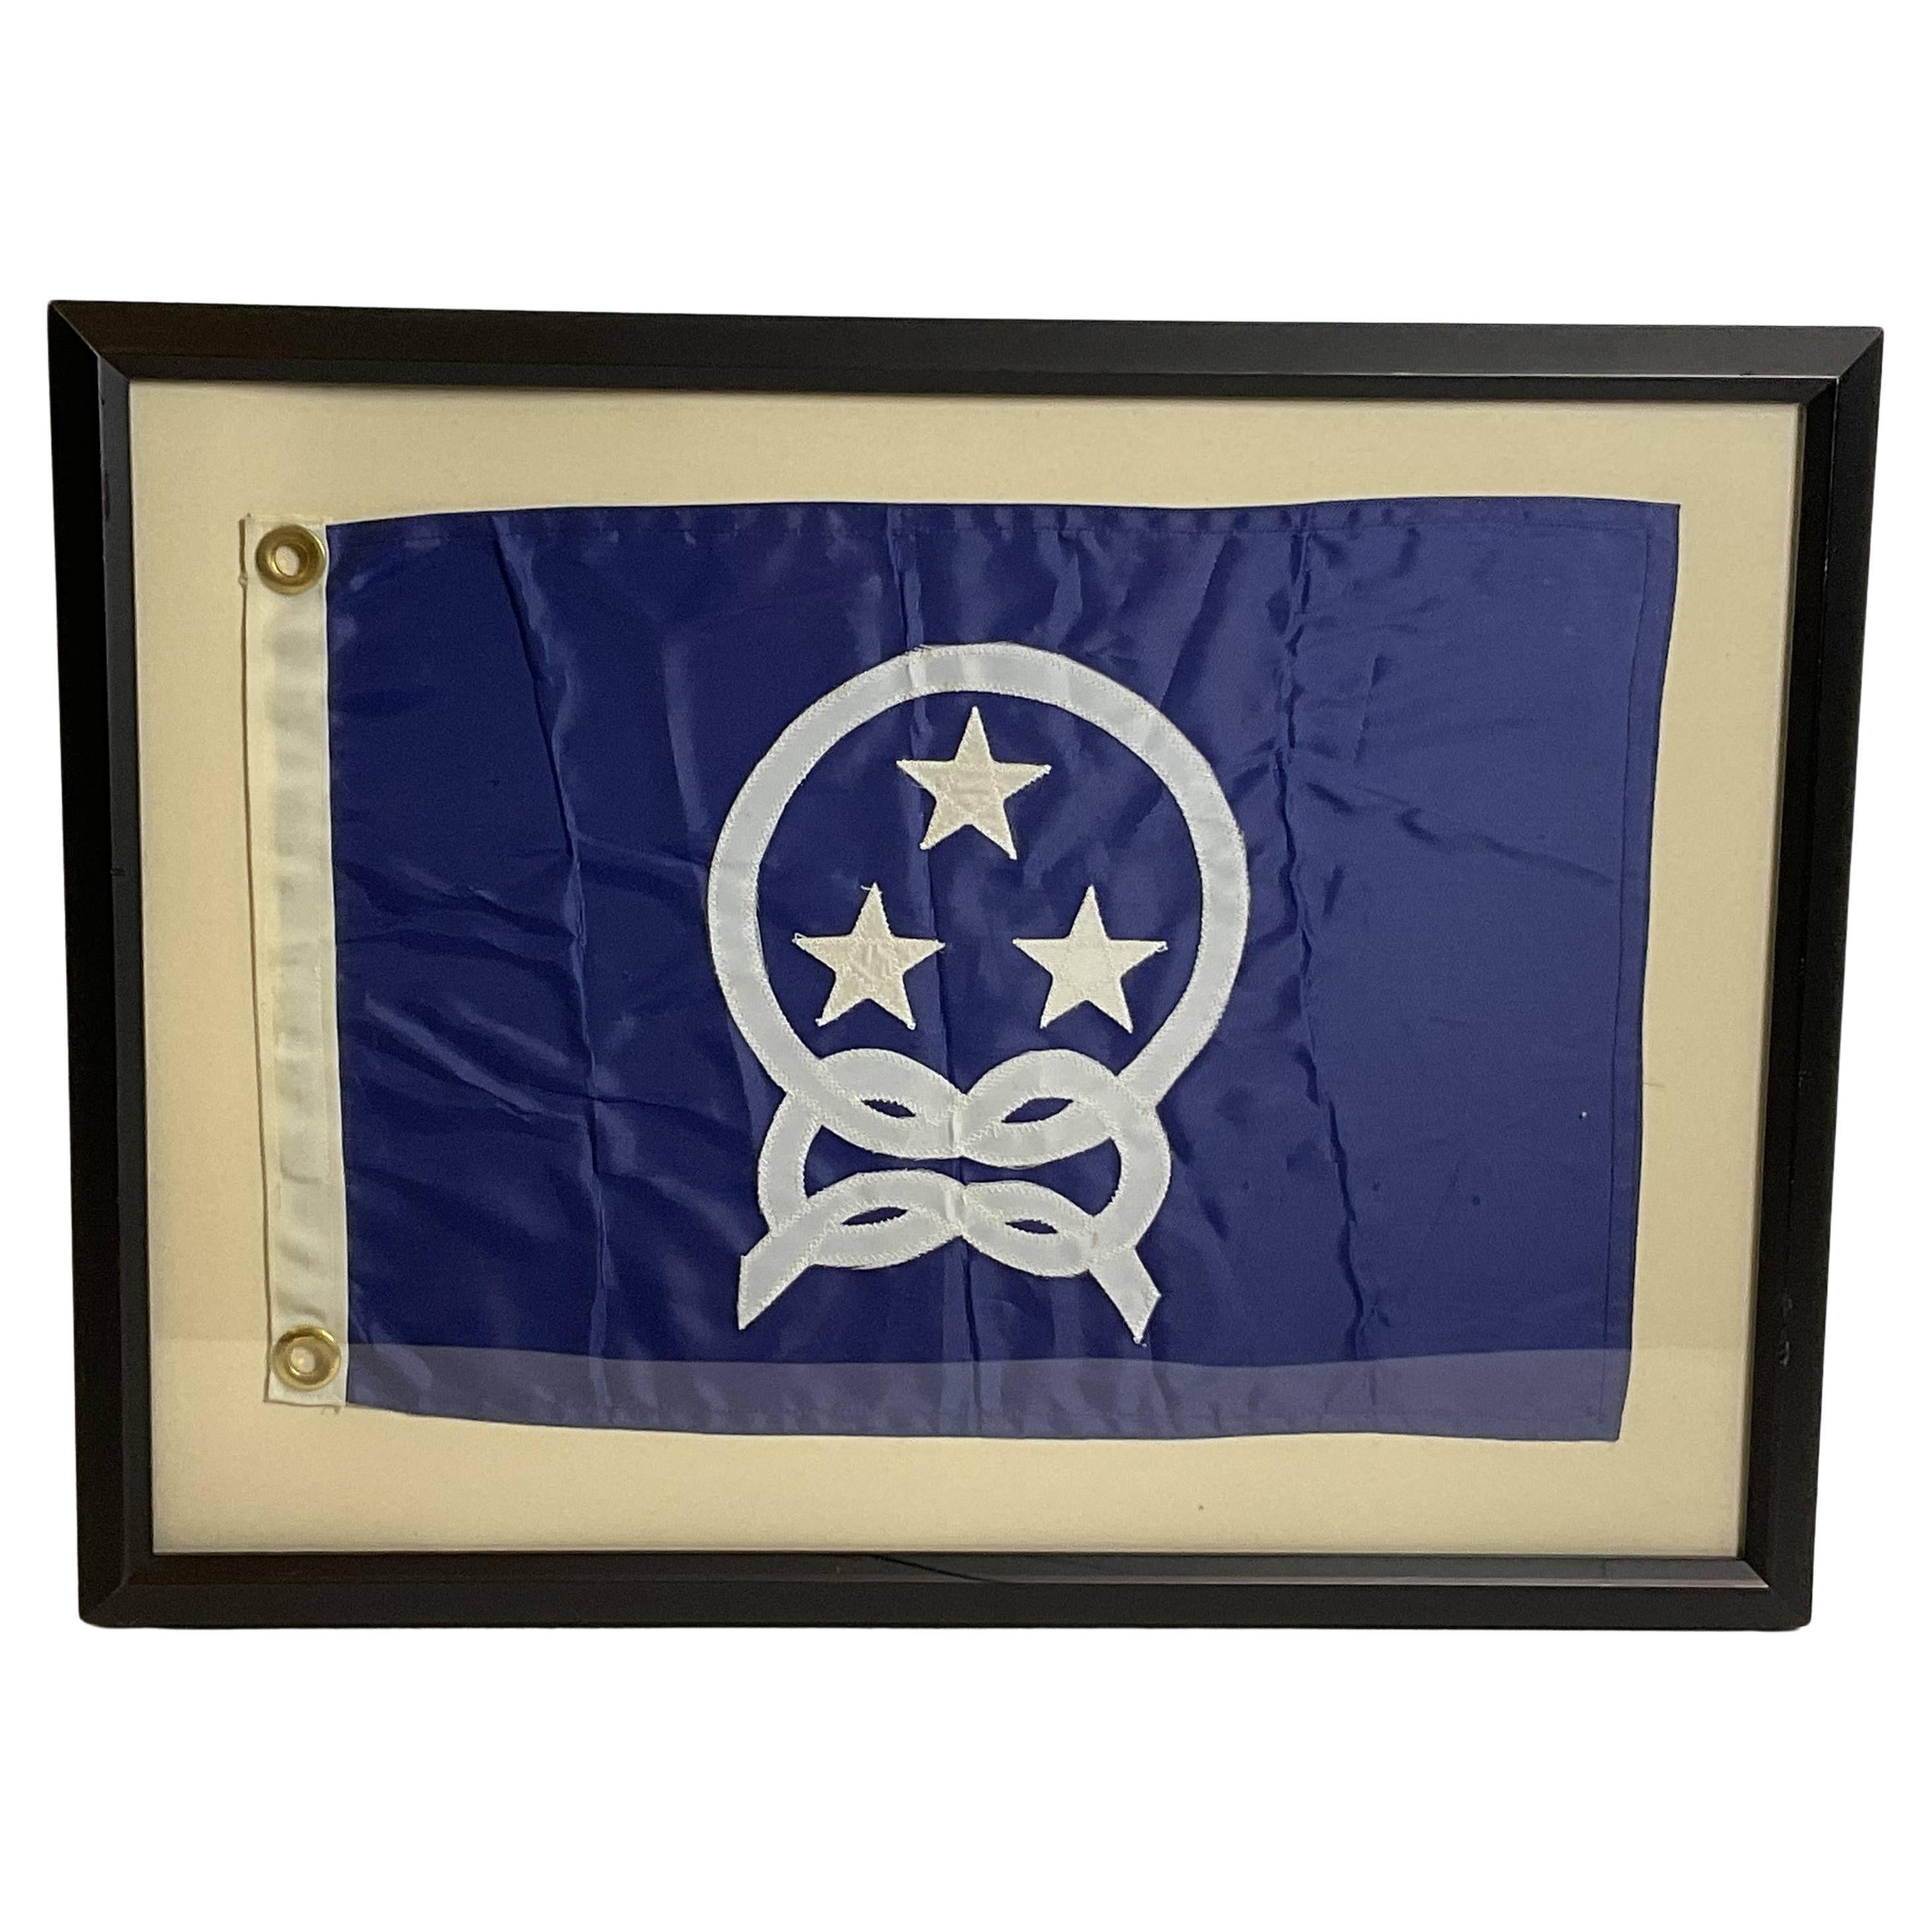 Yacht Club Commodores Flagge